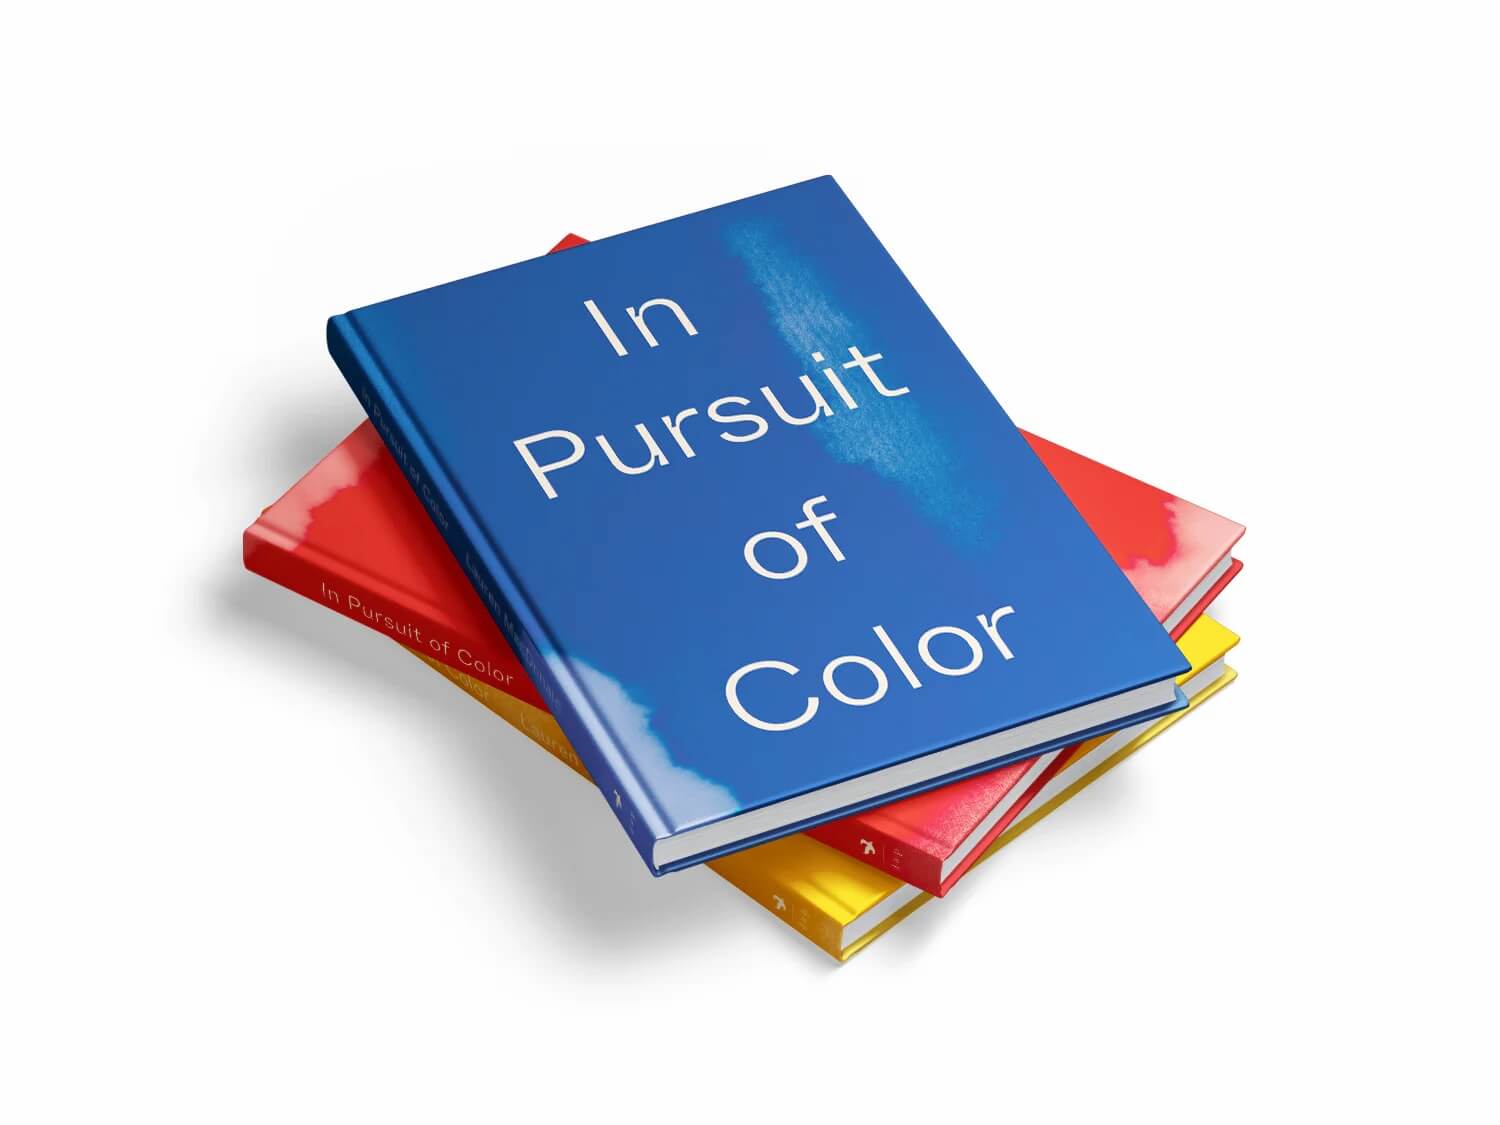 in_pursuit_of_color_macdonald_atelier_editions_1